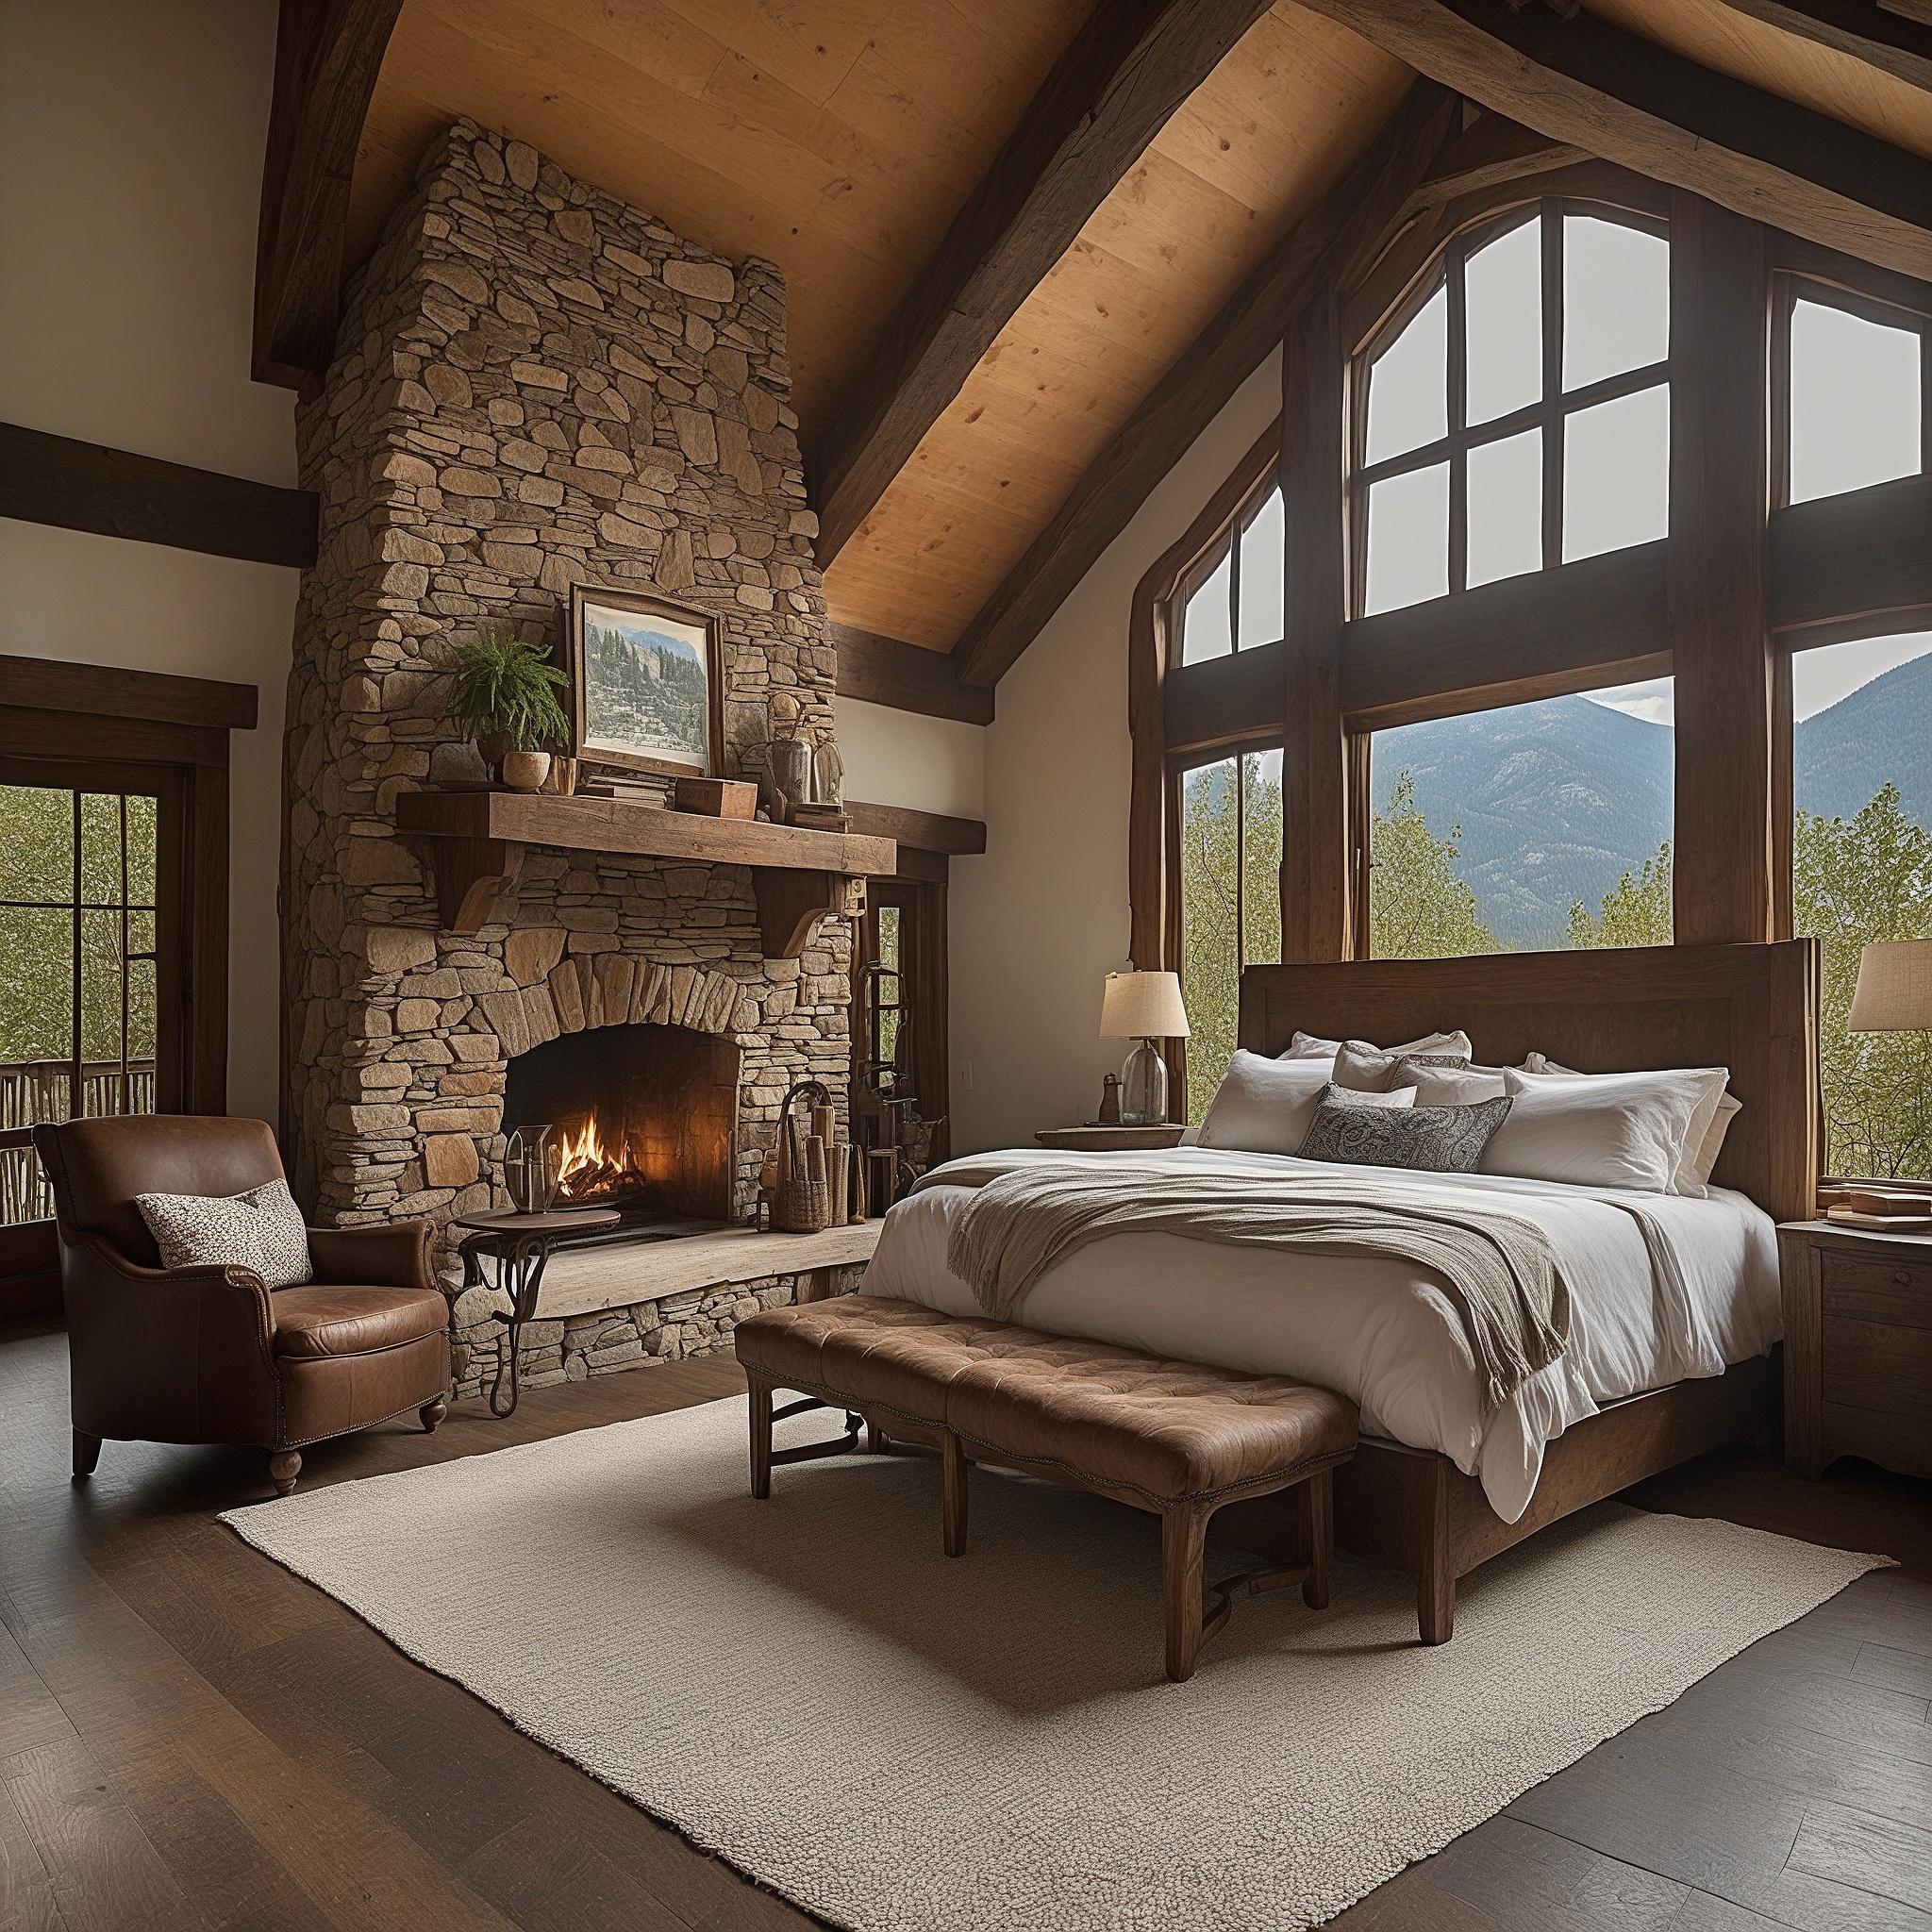 Rustic Bedroom With Exposed Beams, Stone Fireplace And King Size Bed